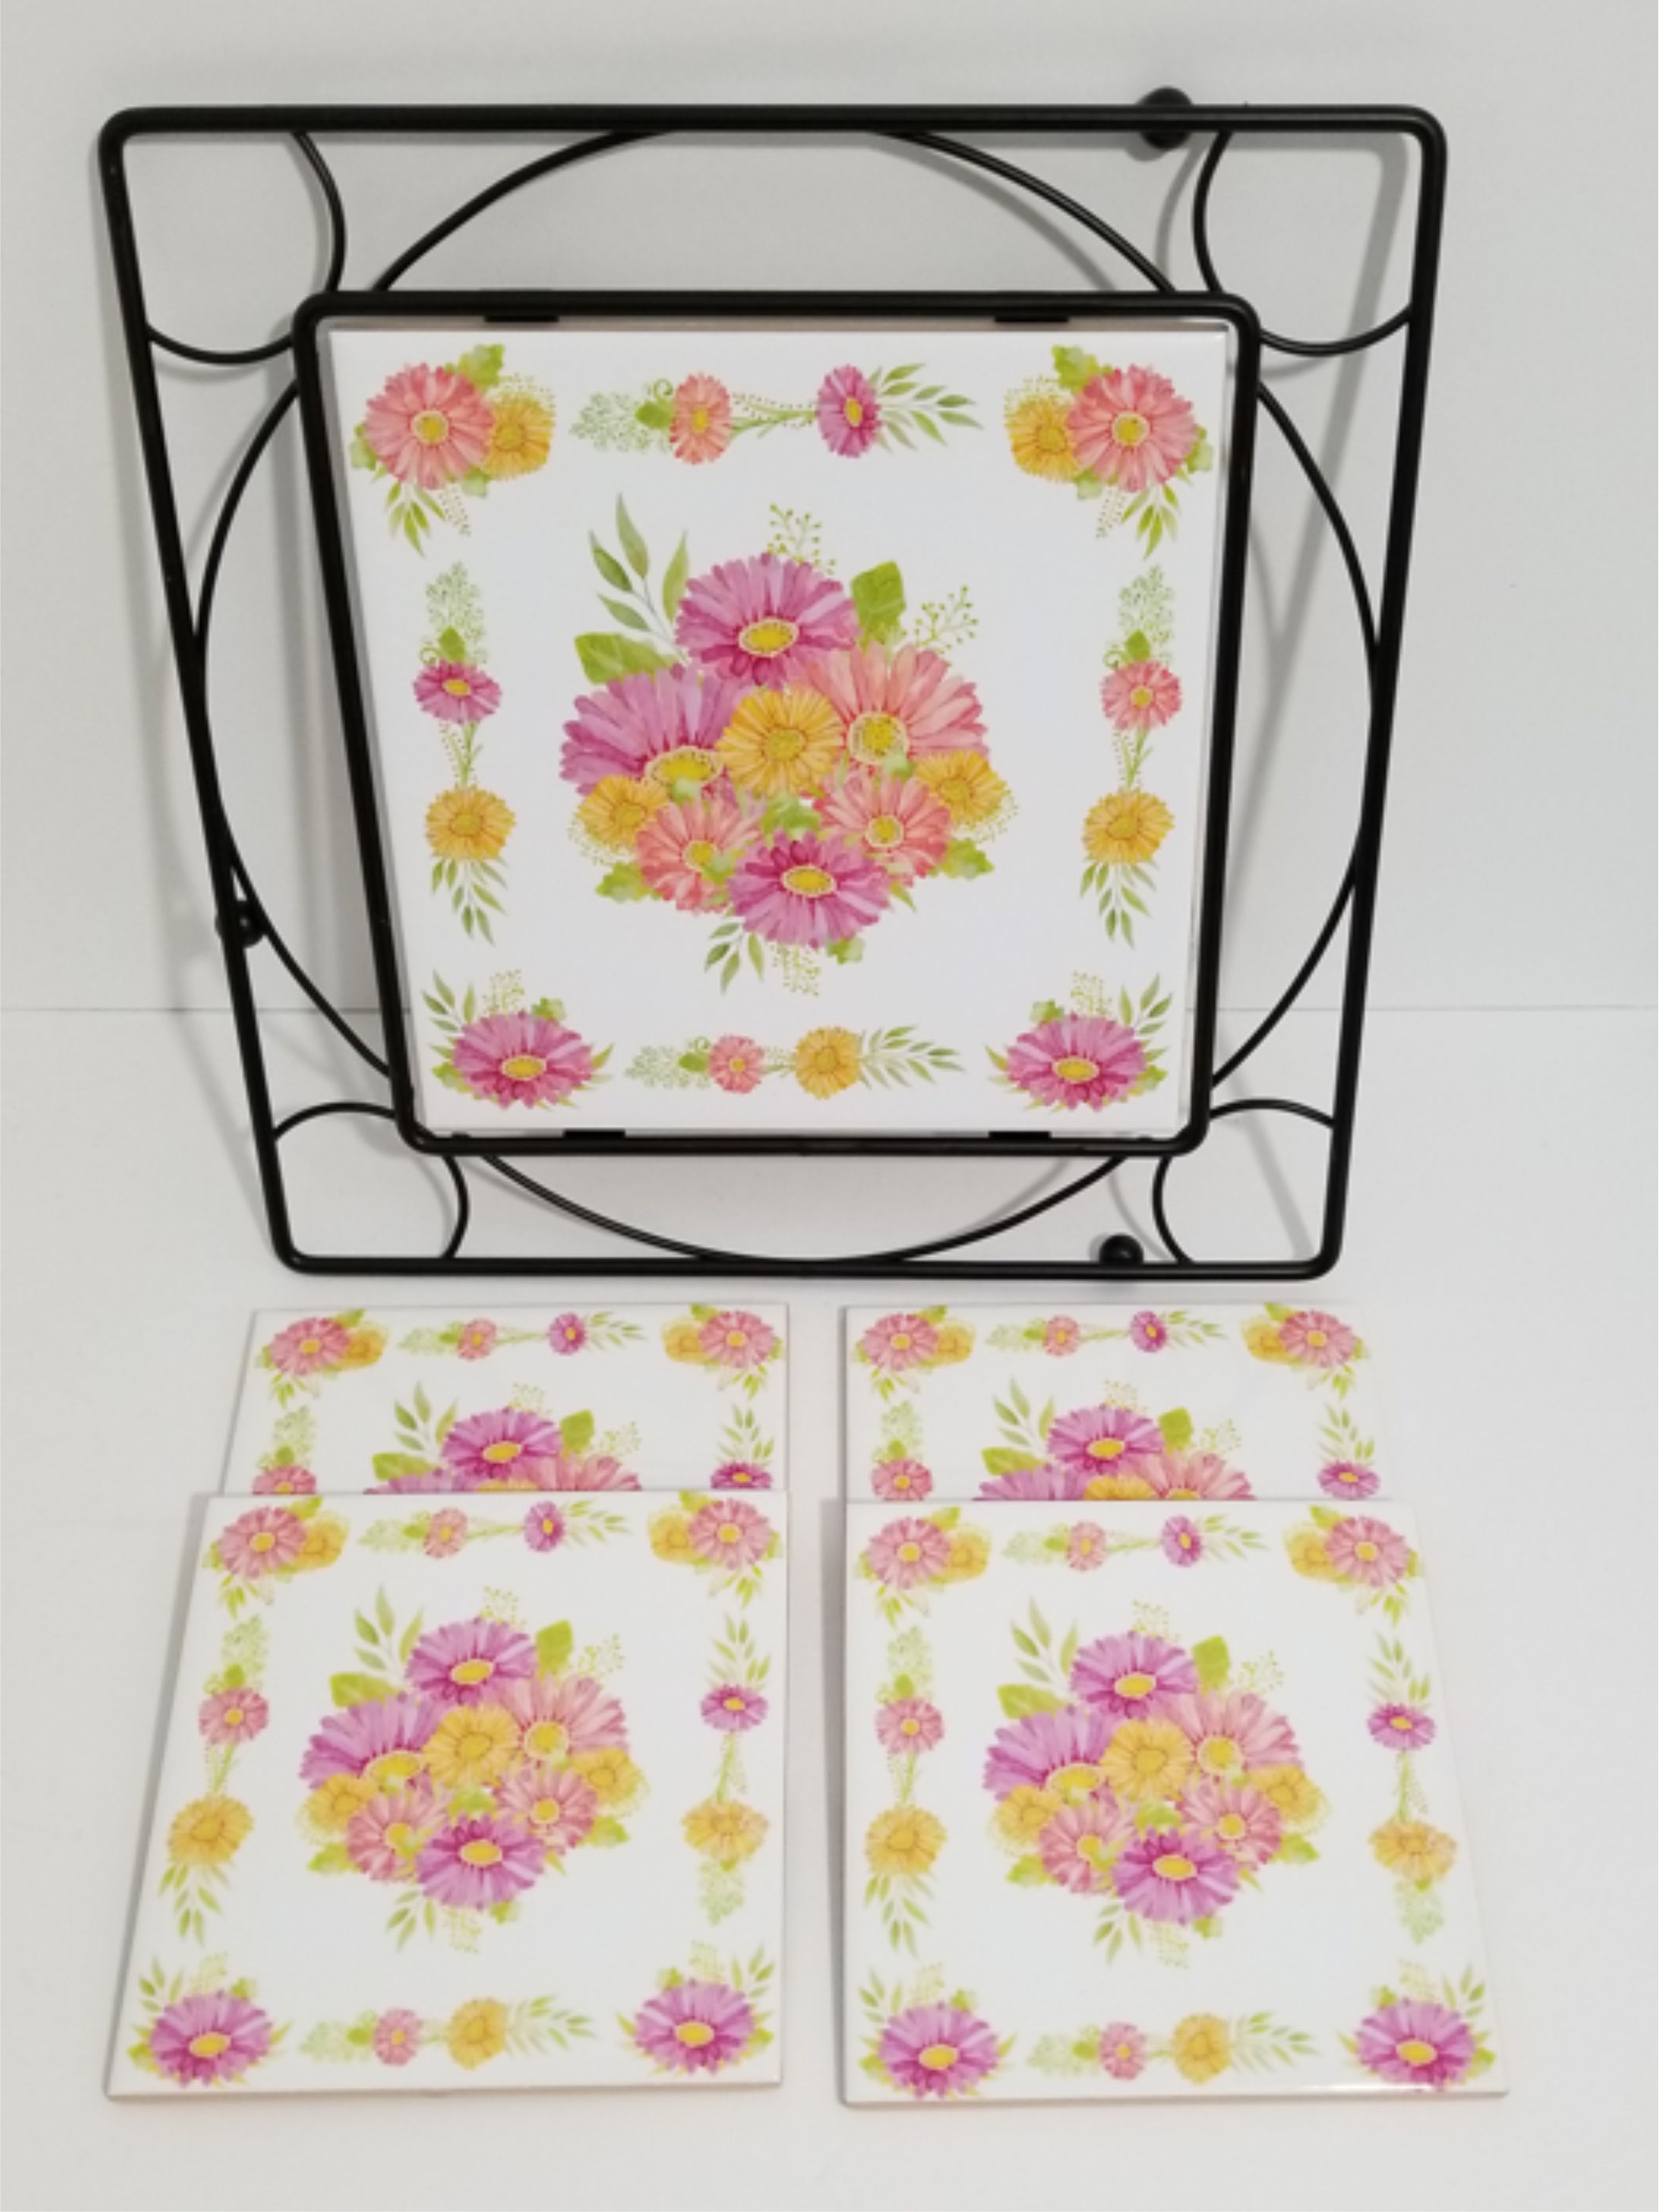 Spring kitchen collection made with sublimation printing